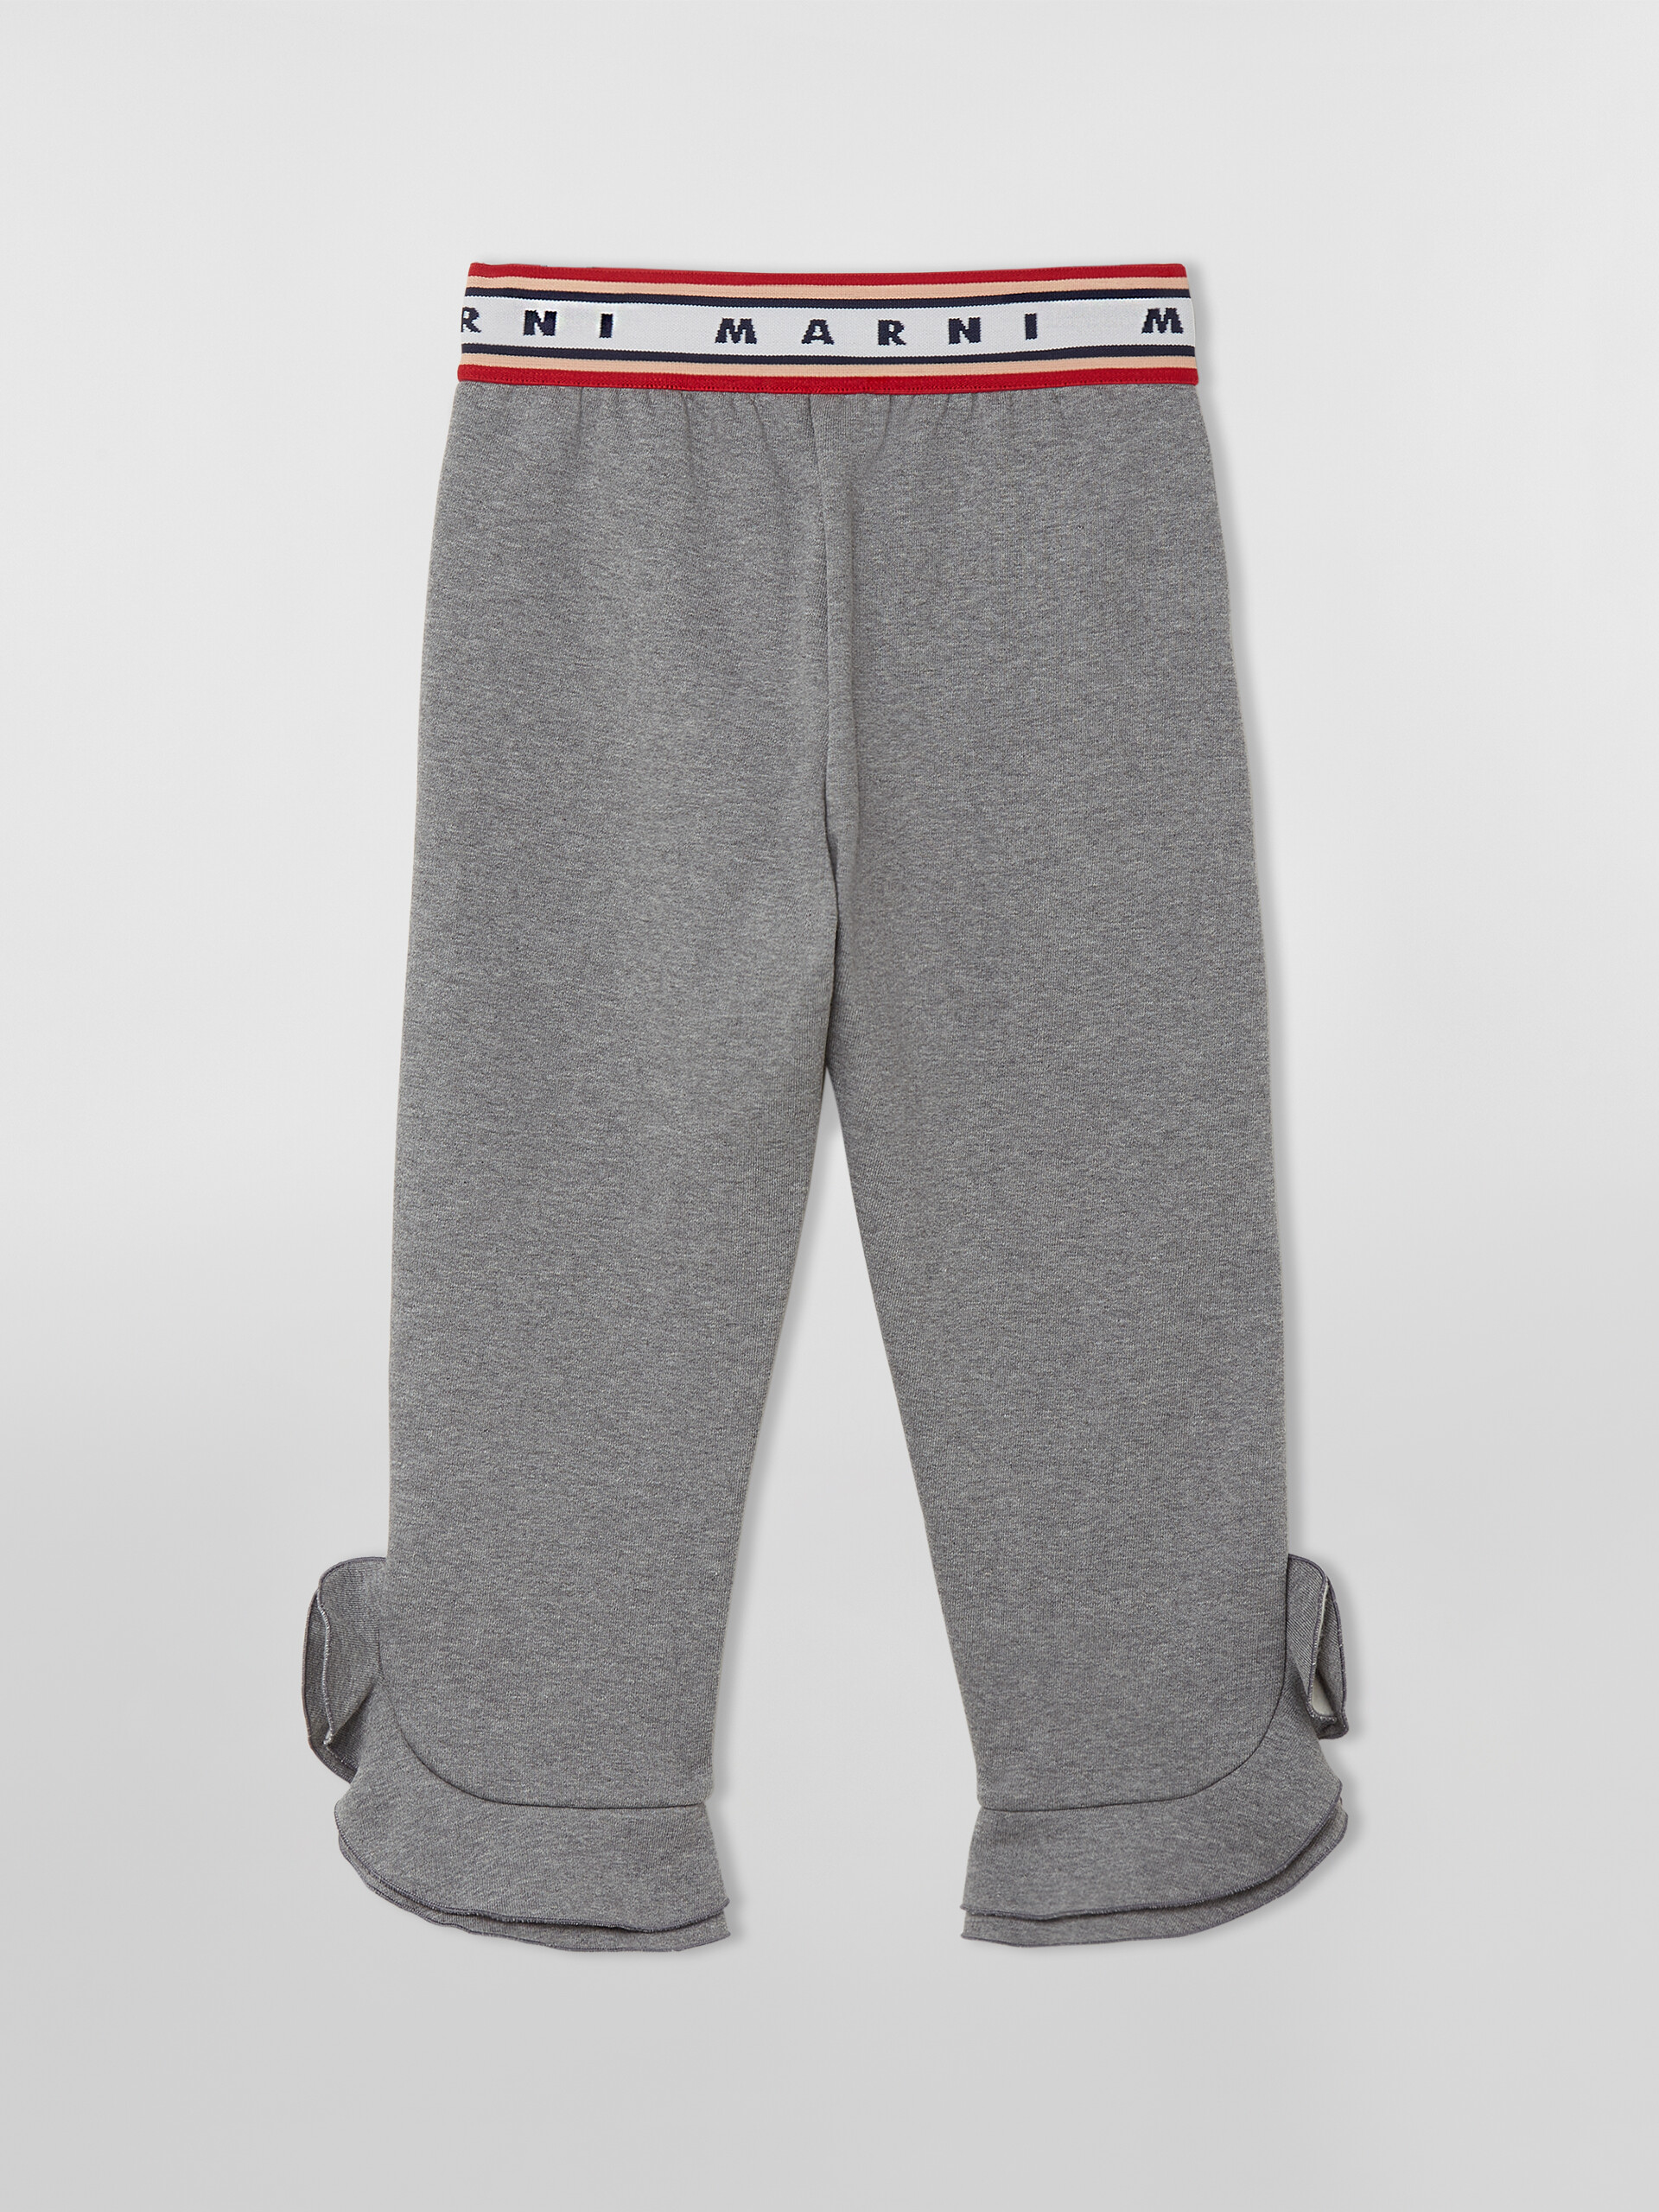 COTTON FLEECE PANT WITH ROUCHES - Pants - Image 2